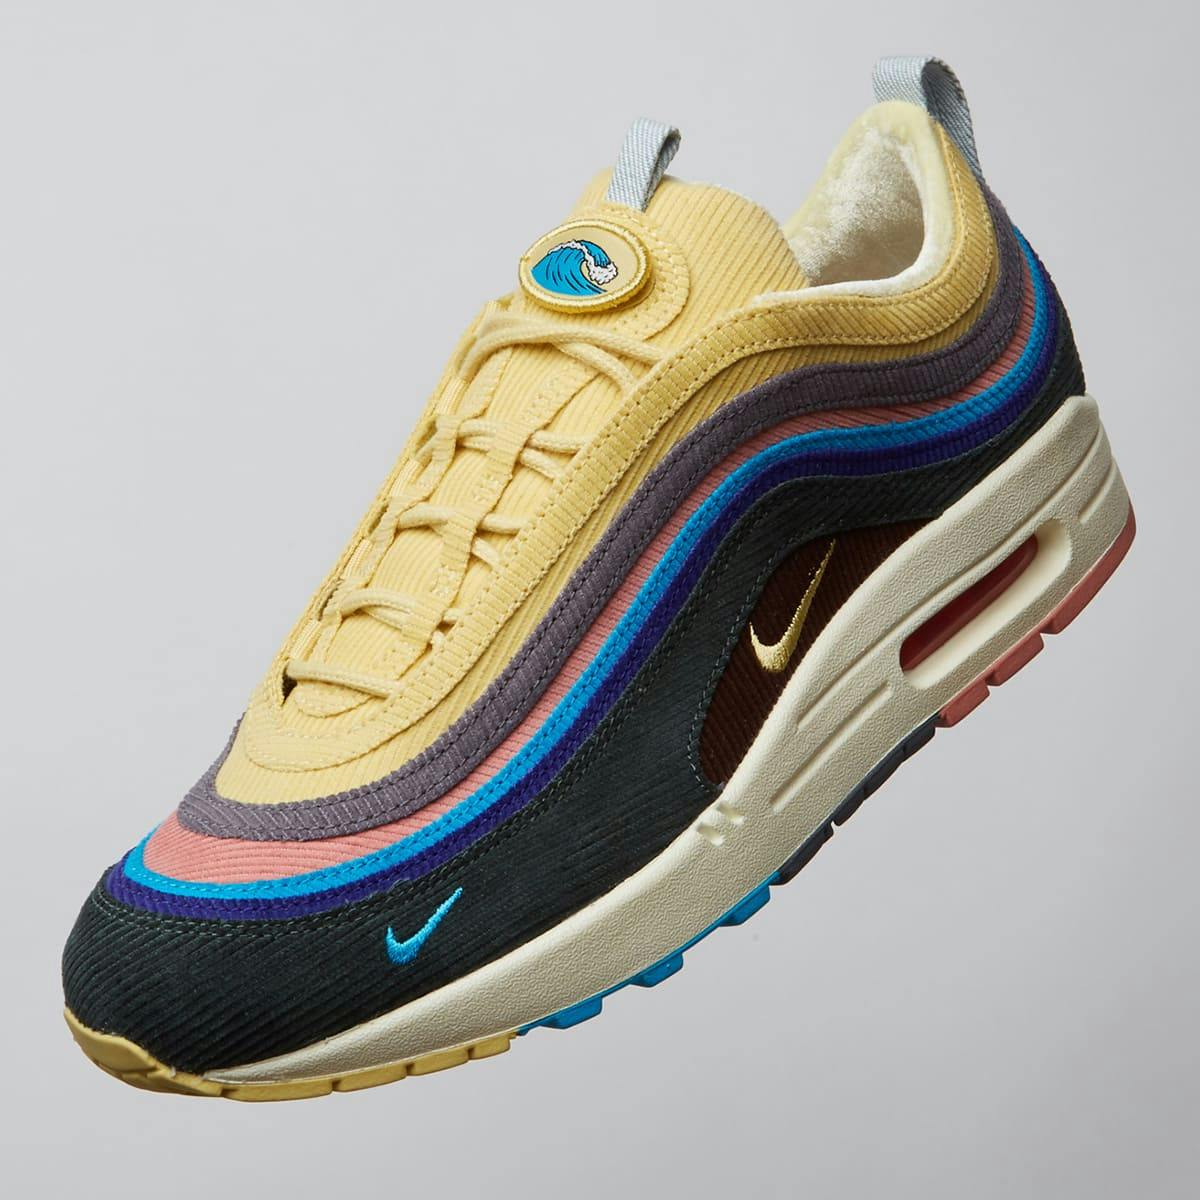 Nike x Sean Wotherspoon Air Max 1/97 - Register Now on END. (DK